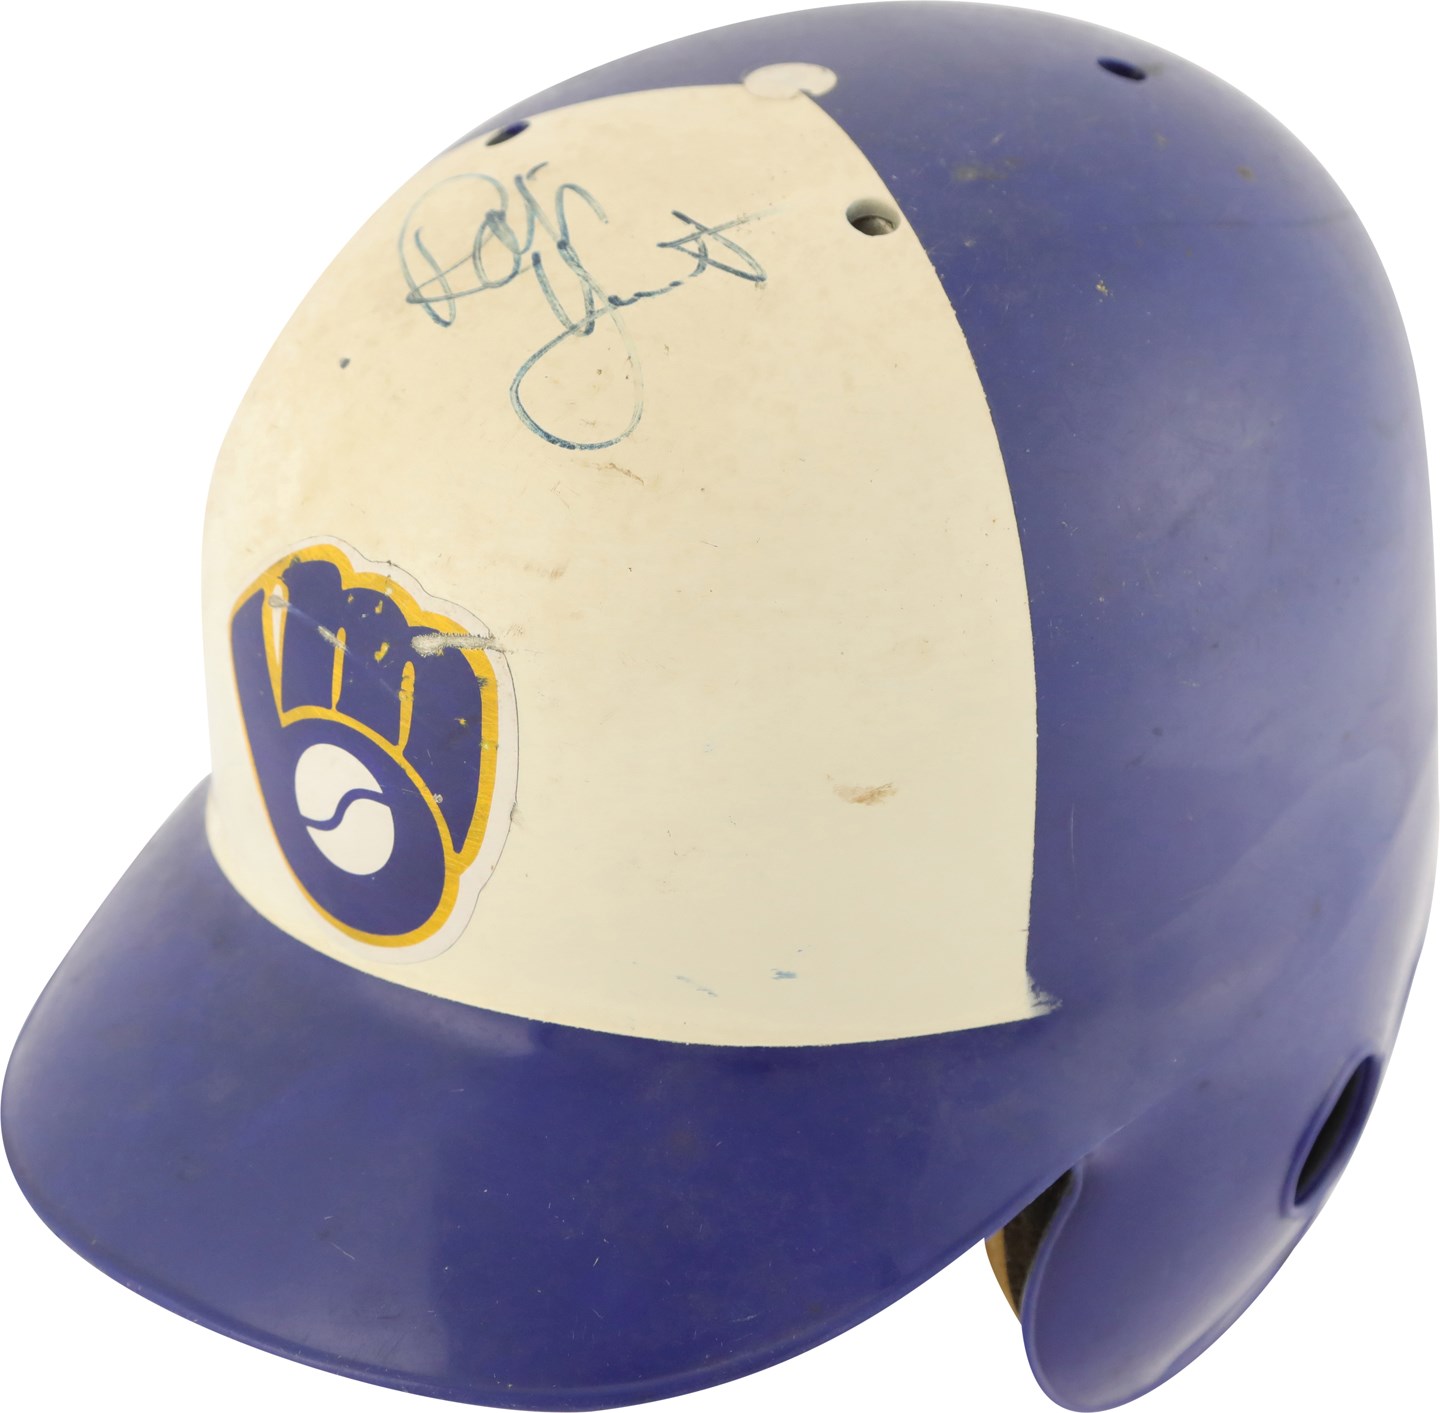 Baseball Equipment - Mid-1980s Robin Yount Milwaukee Brewers Signed Game Used Helmet (PSA)